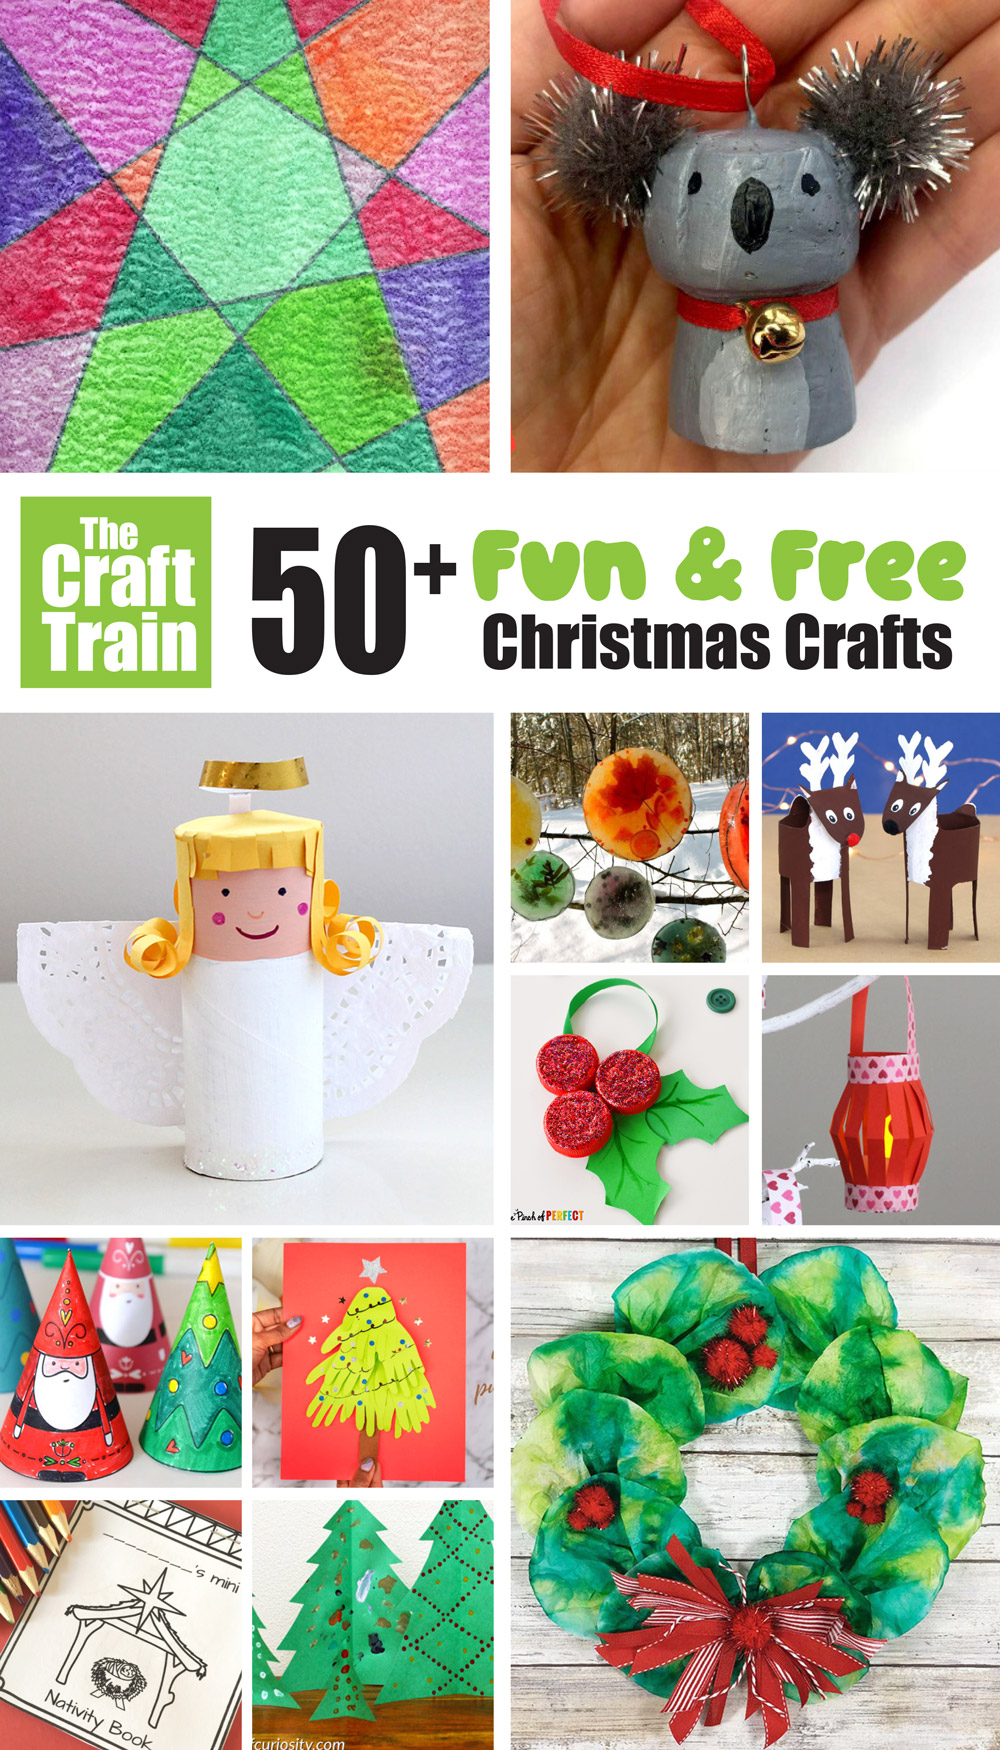 Fun and free Christmas crafts for kids